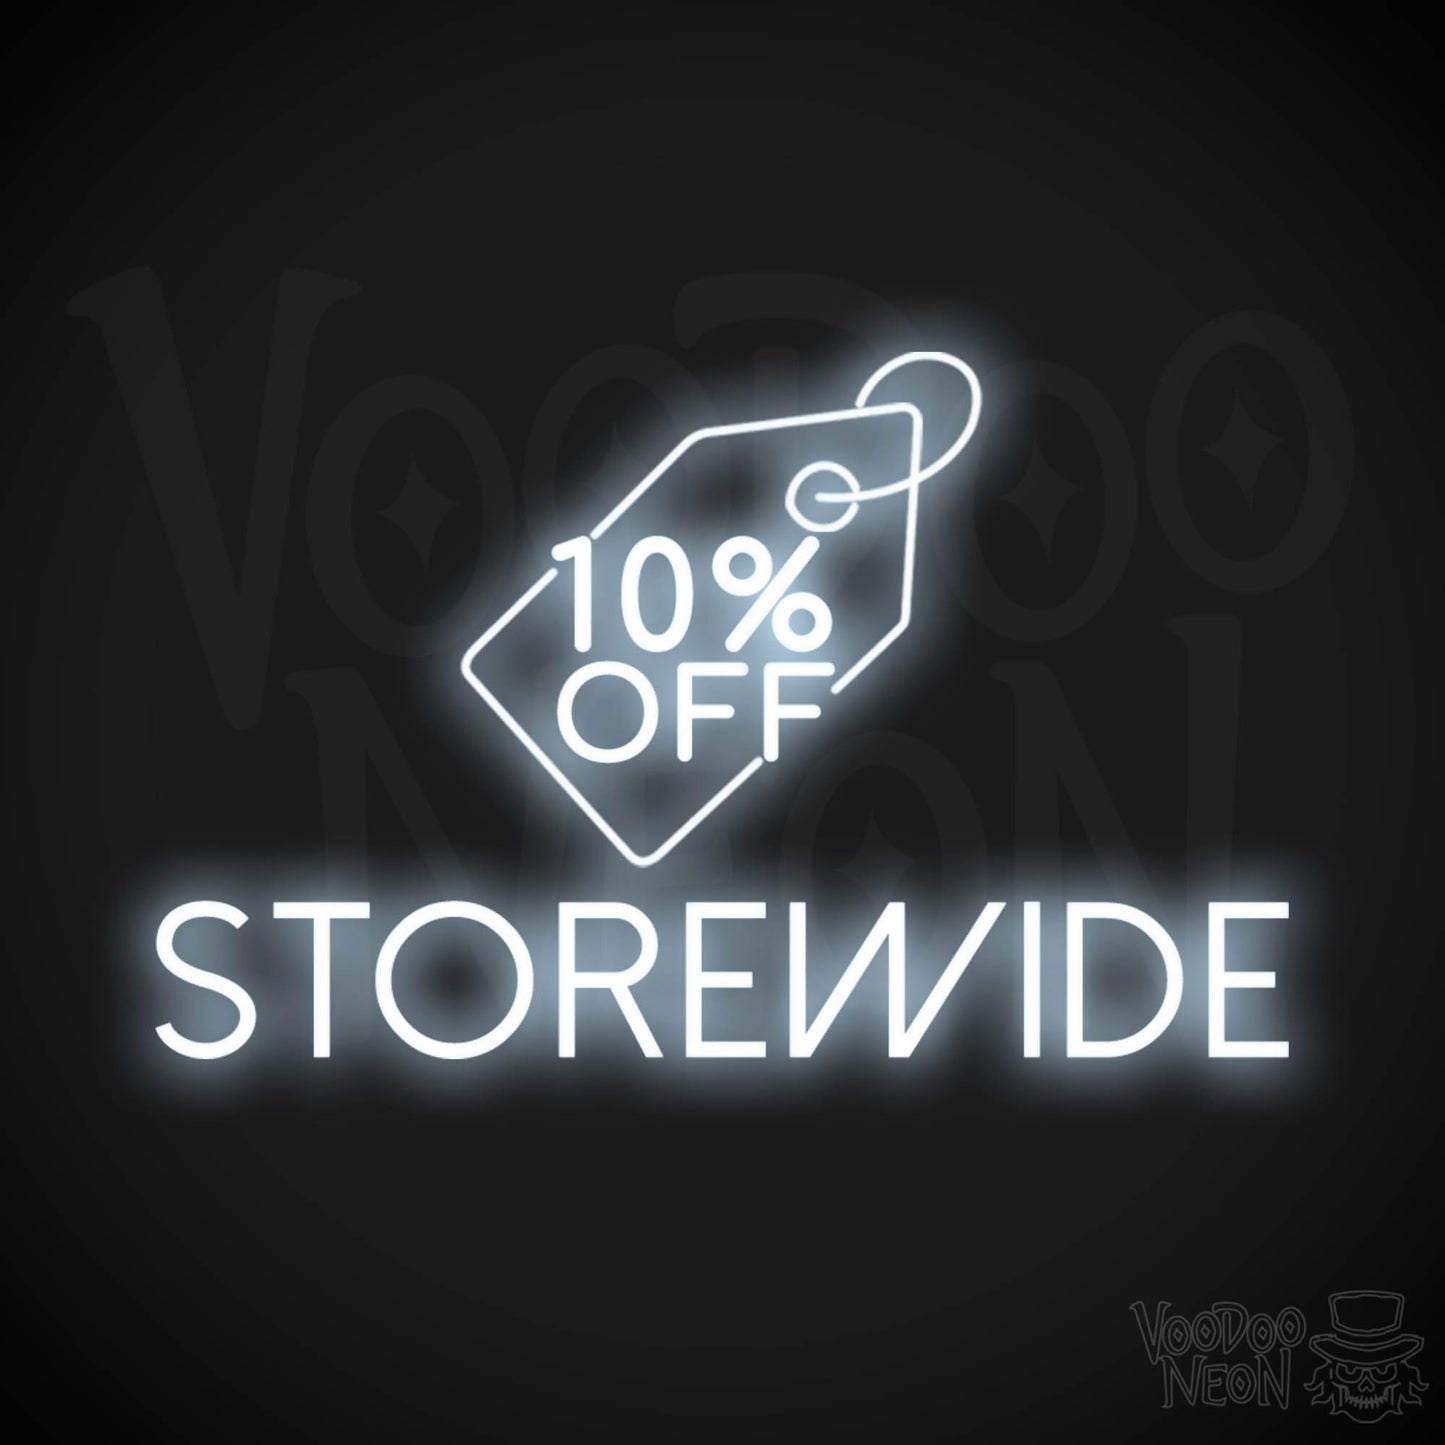 10% Off Storewide Neon Sign - 10% Off Storewide Sign - Neon Shop Signs - Color Cool White